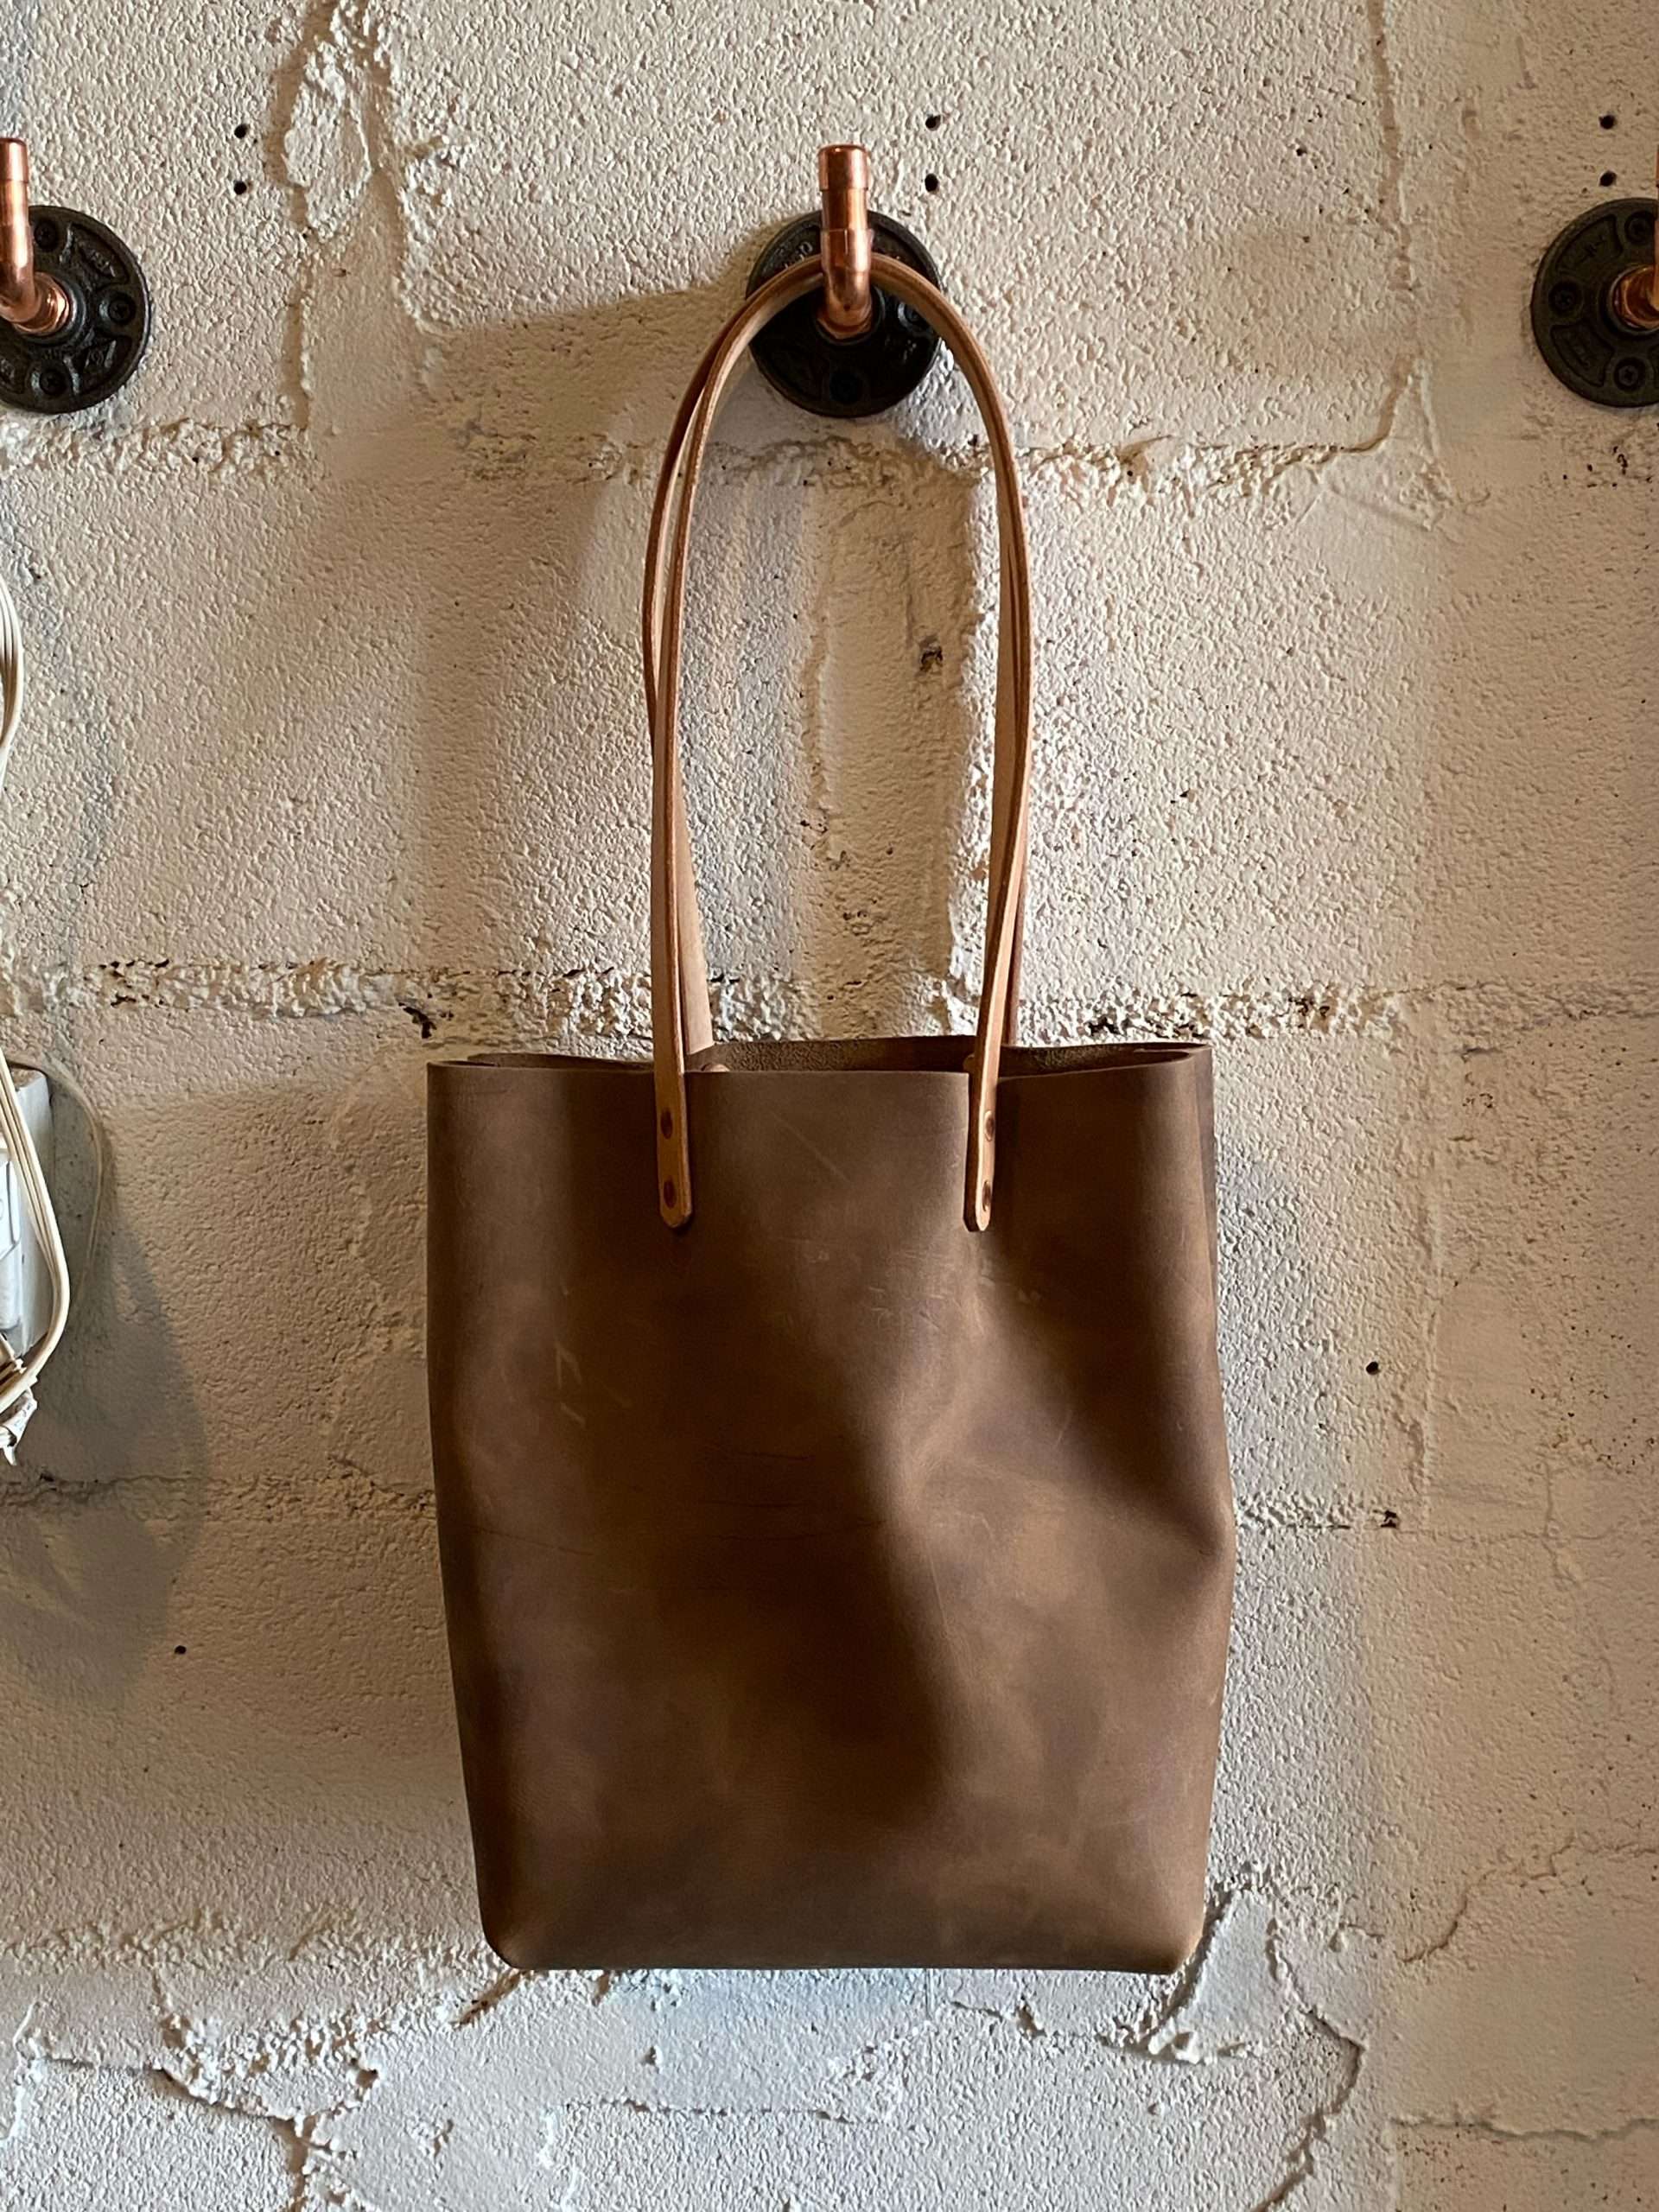 Custom Brown Leather Tote Bag Hanging on Metal Hook against White Concrete Wall